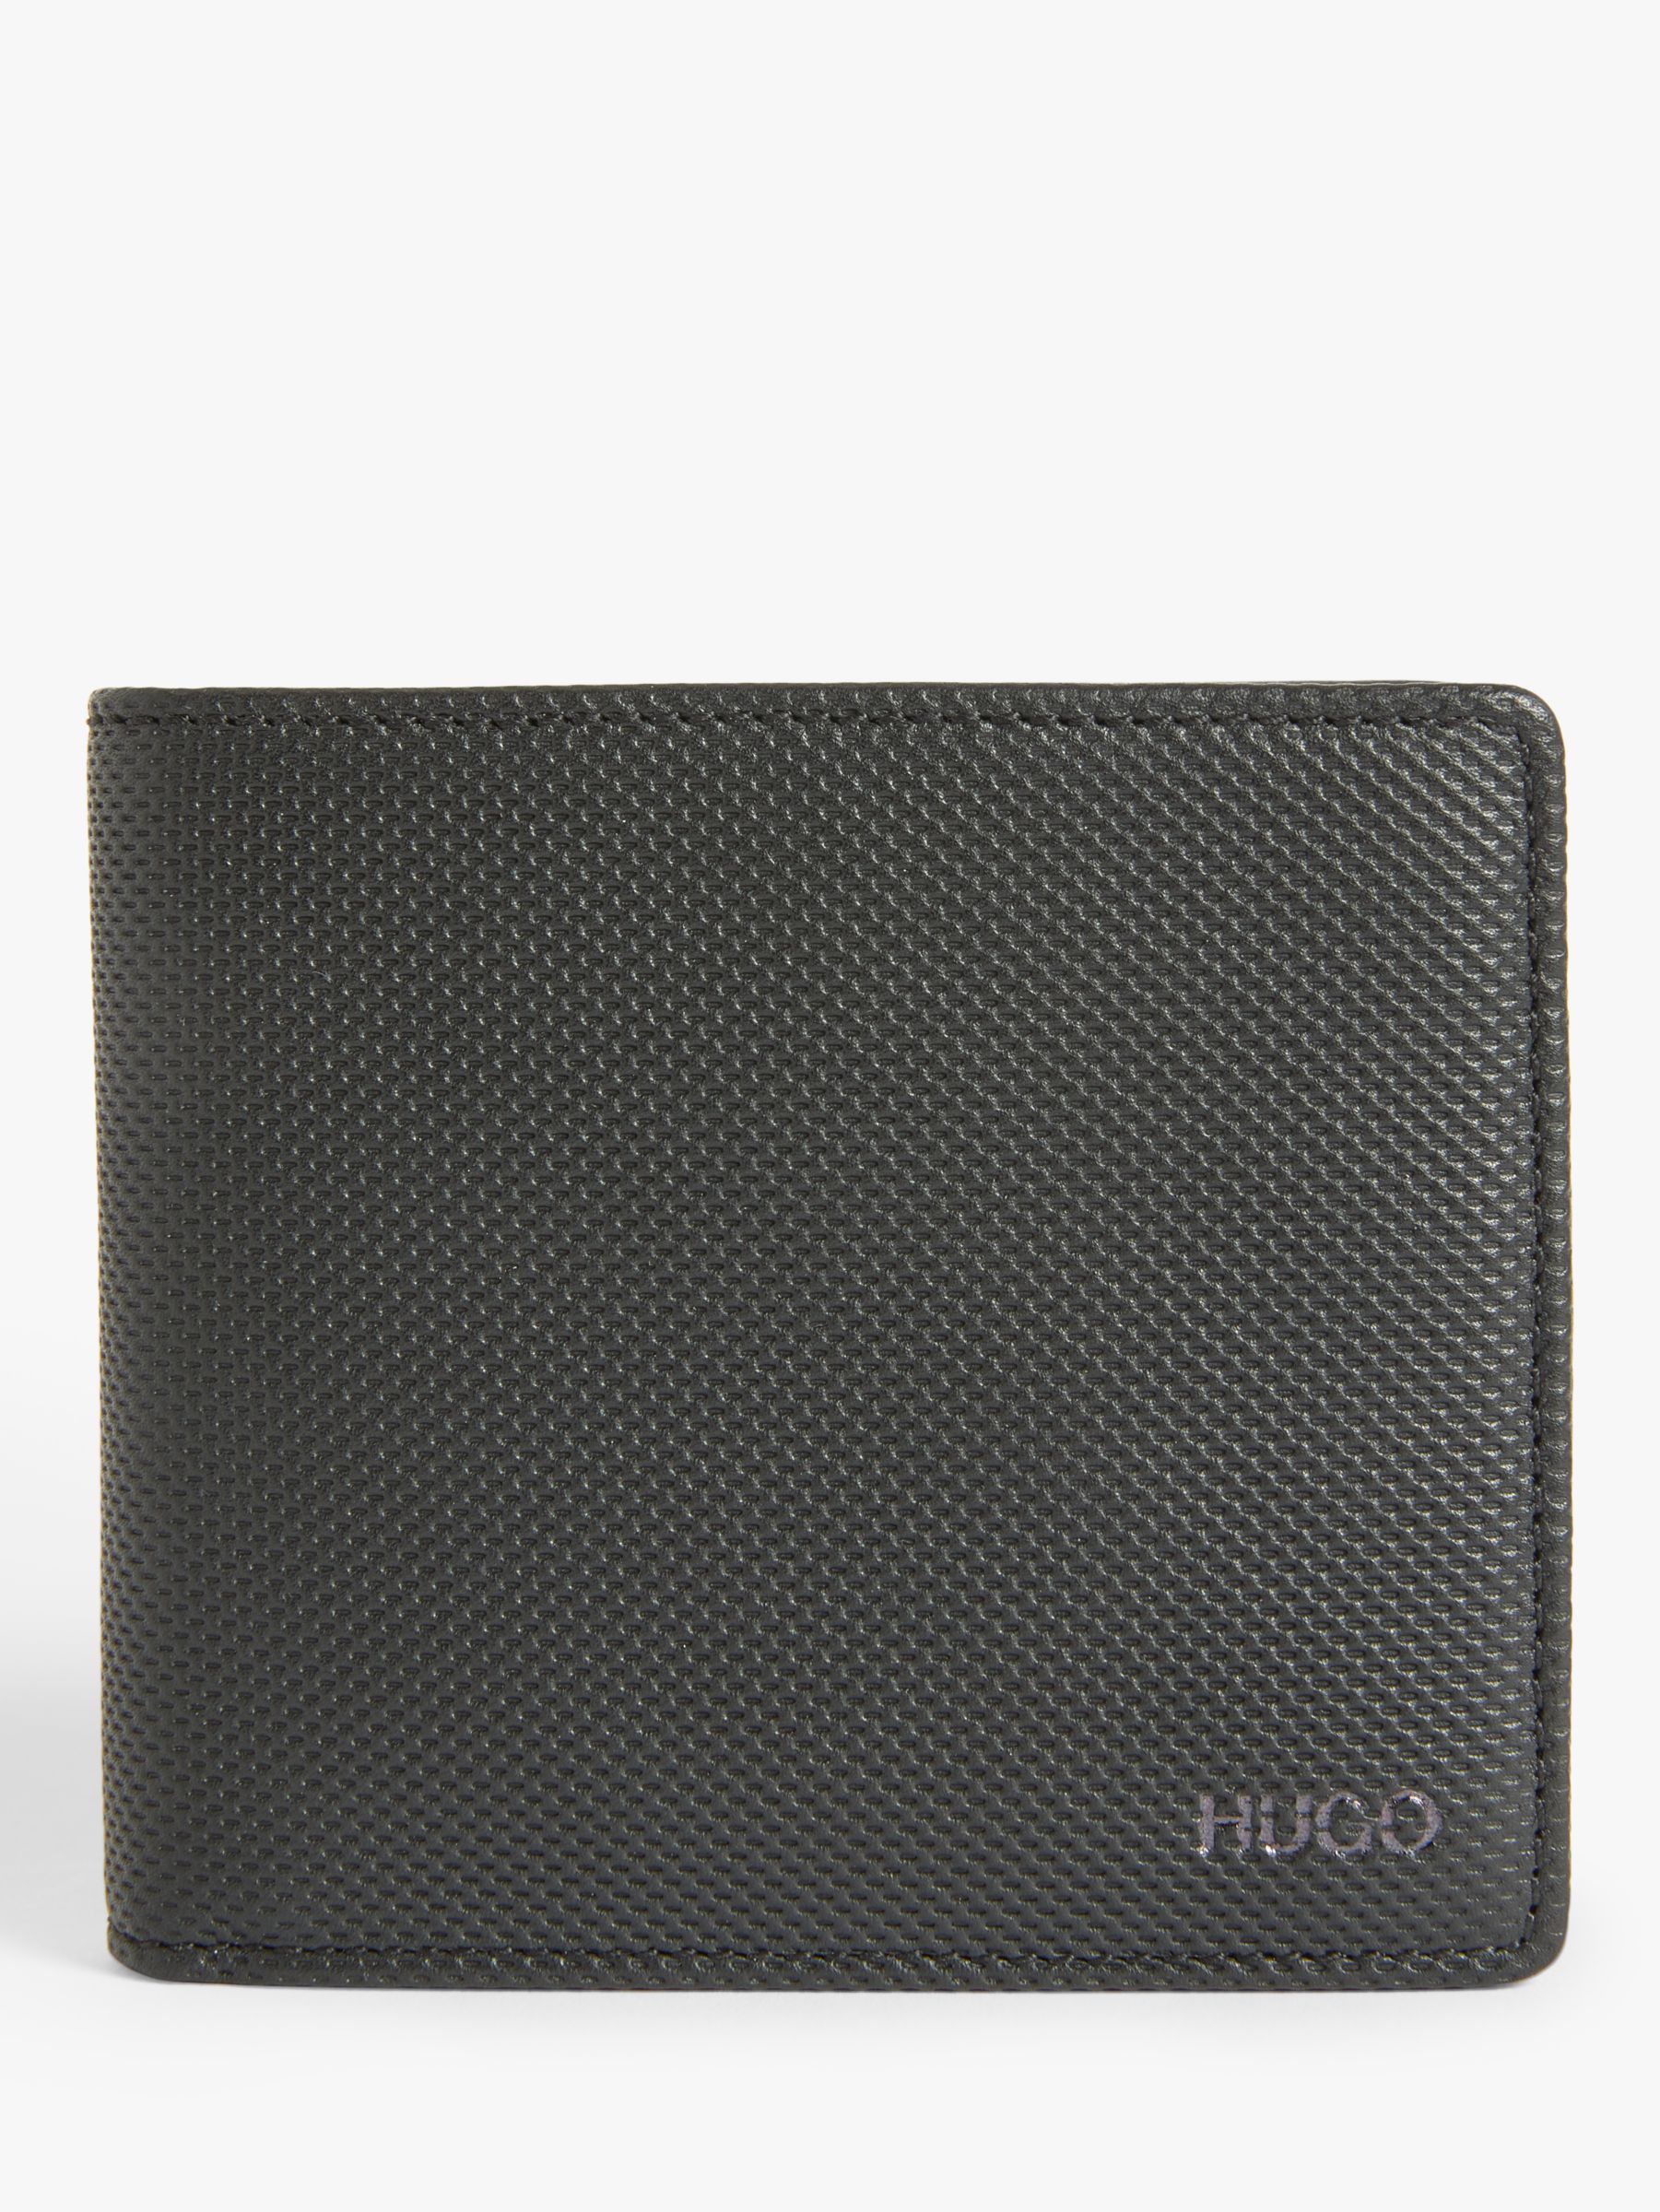 One Size HUGO by Hugo Boss Mens Gift Box with Leather Card Case and Key Ring Black 